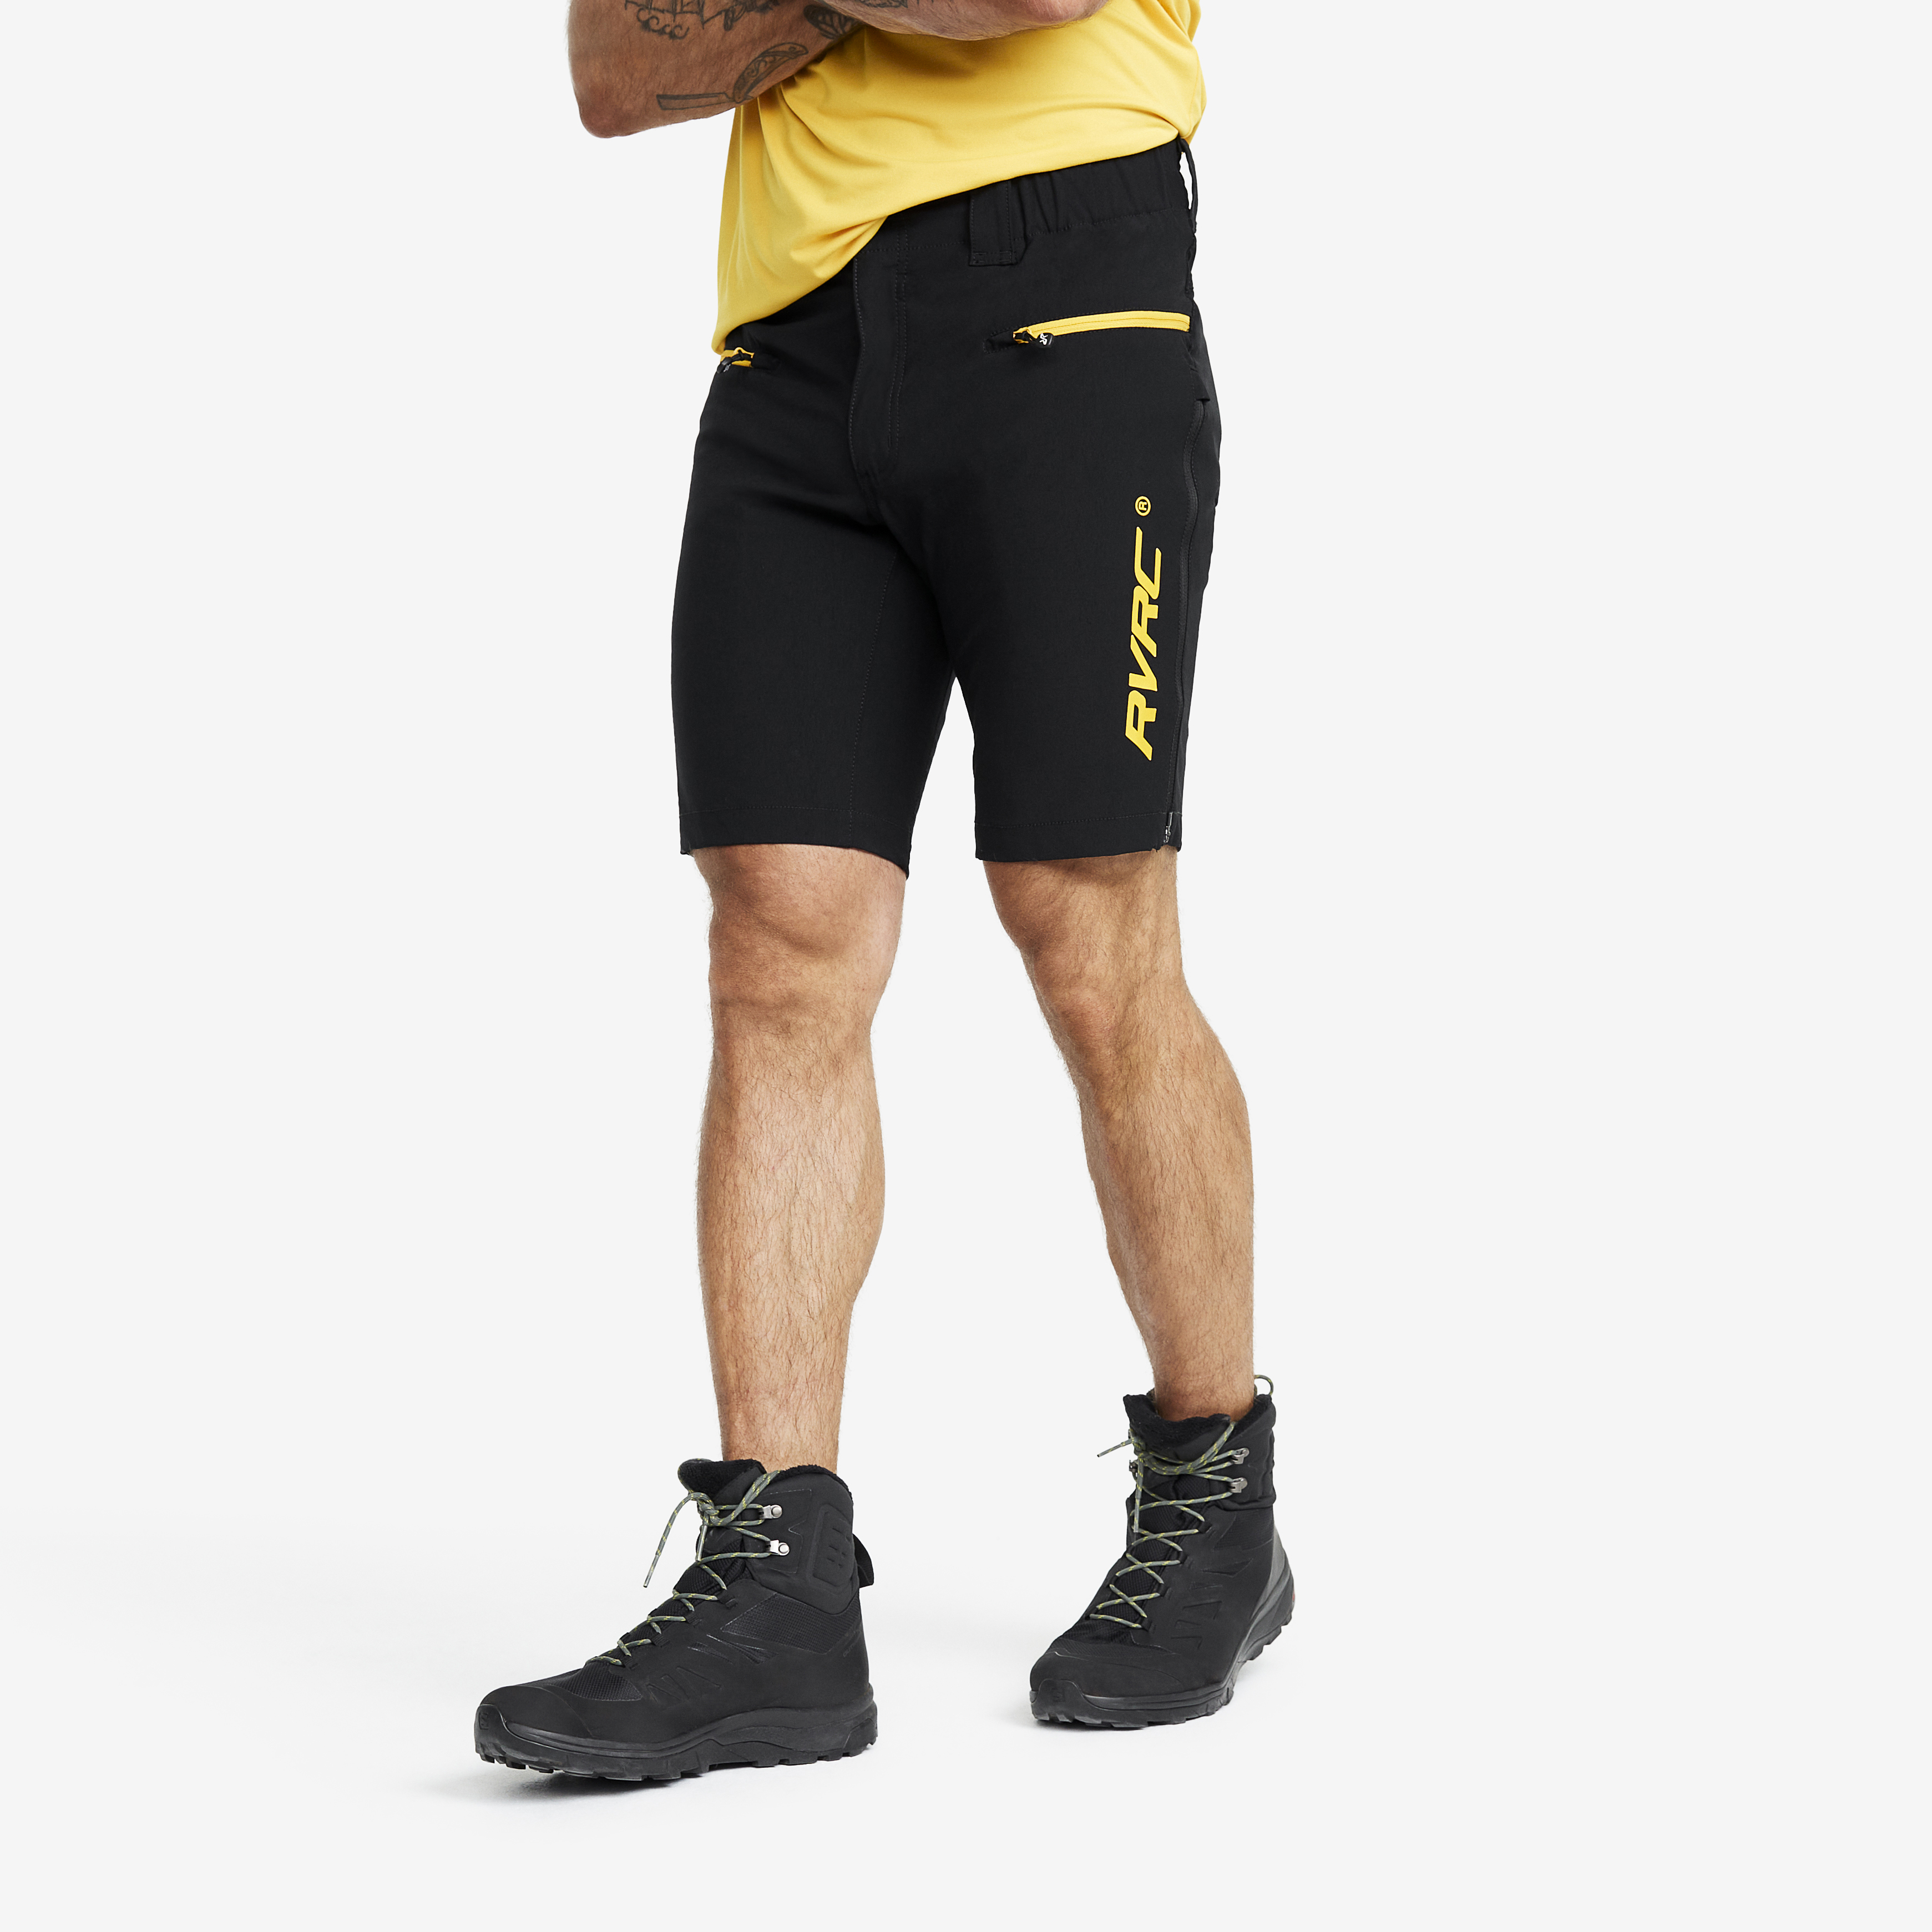 Trail Pro  Shorts Black/Yellow Hombres